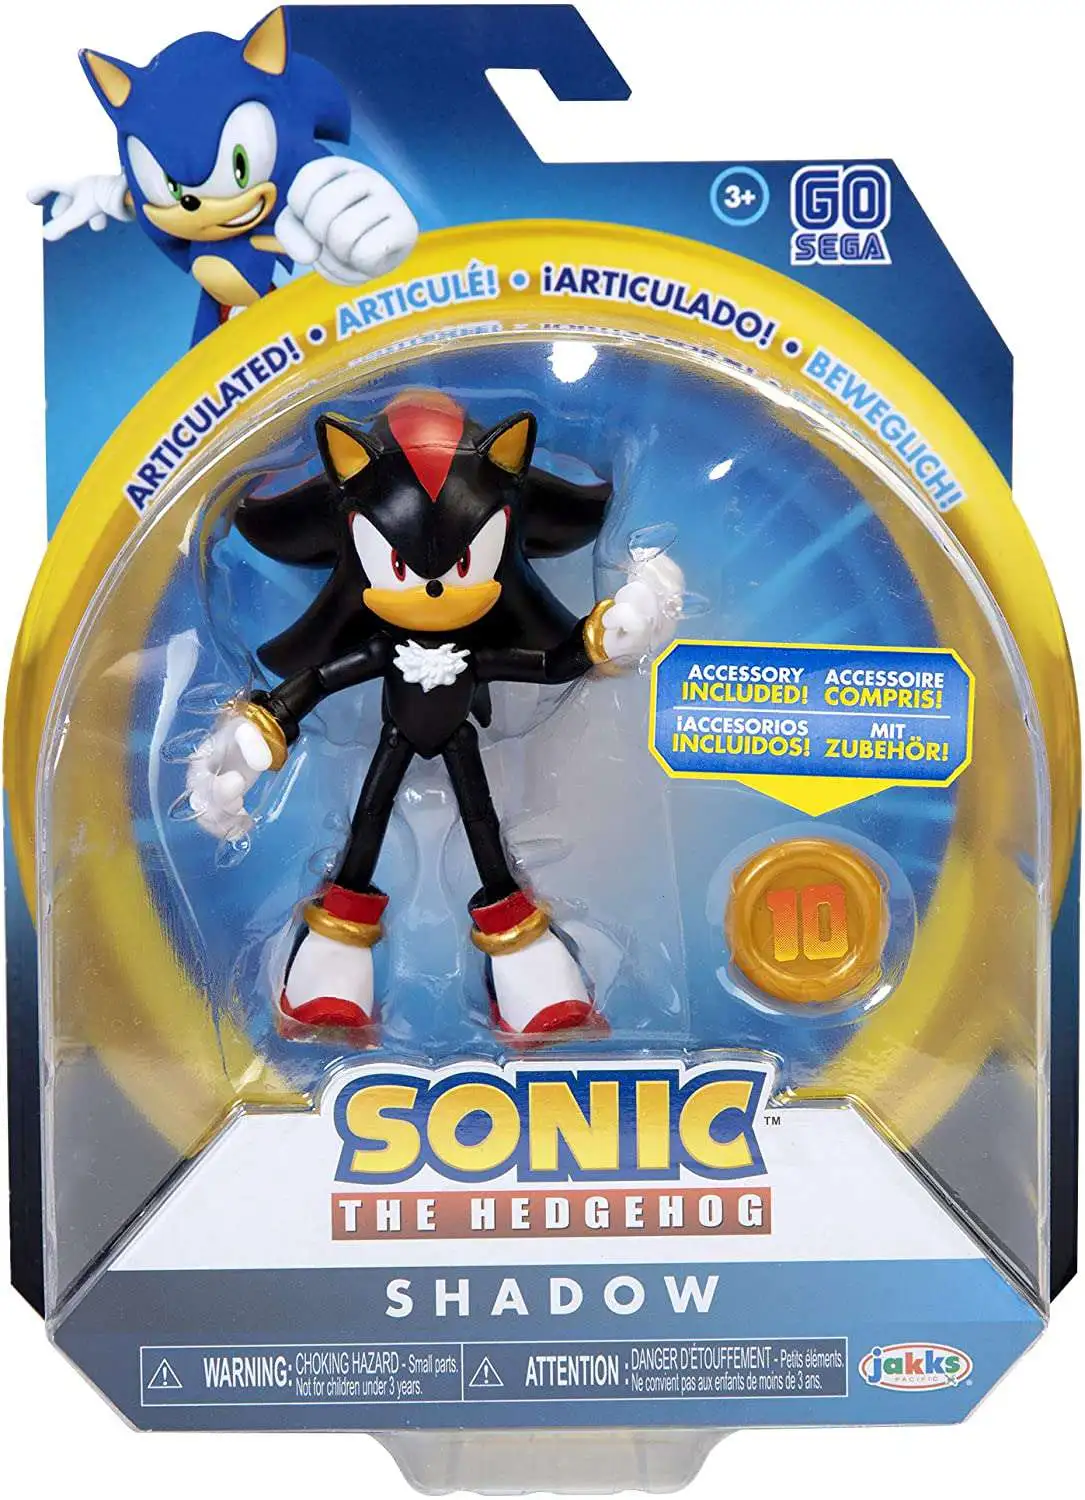 JAKKS Pacific Sonic The Hedgehog 4" Super Shadow Figure with Chaos Emerald for sale online 